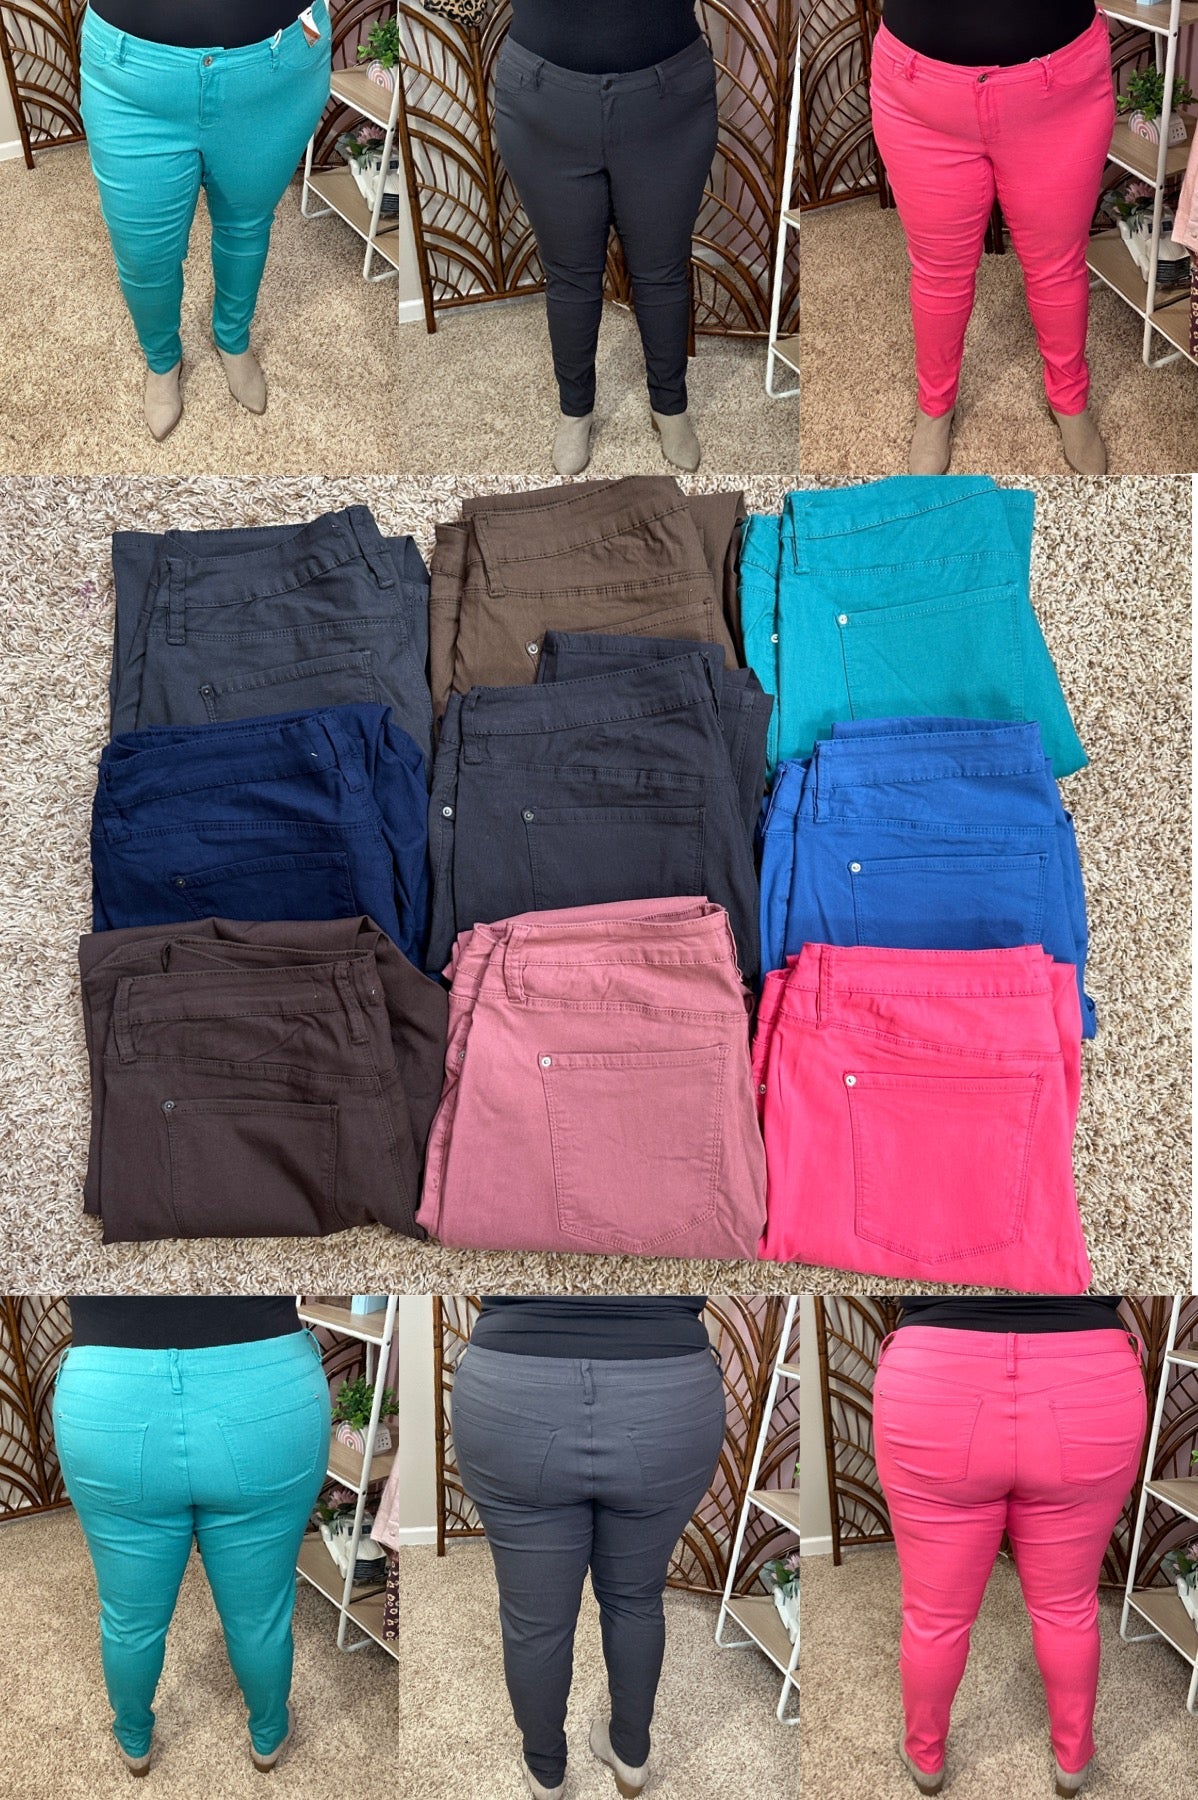 Move With Me Hyperstretch Pants - 15 colors - Restocked!